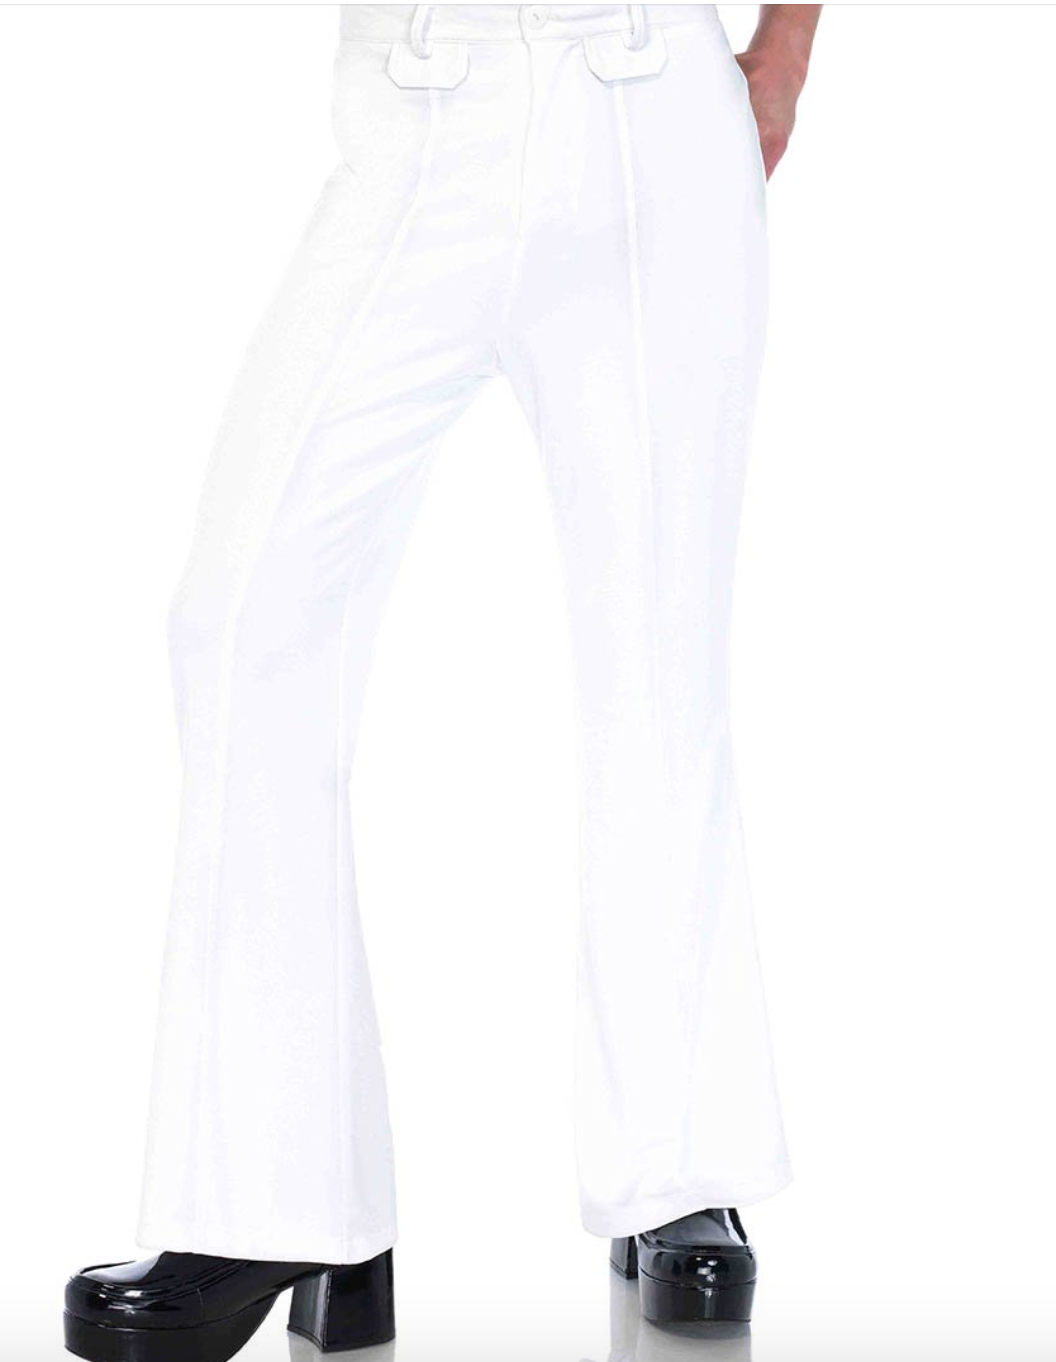 FLARES White Mens Bell Bottoms Hippie vtg indie Trousers Disco 60s 70s Pants  | eBay